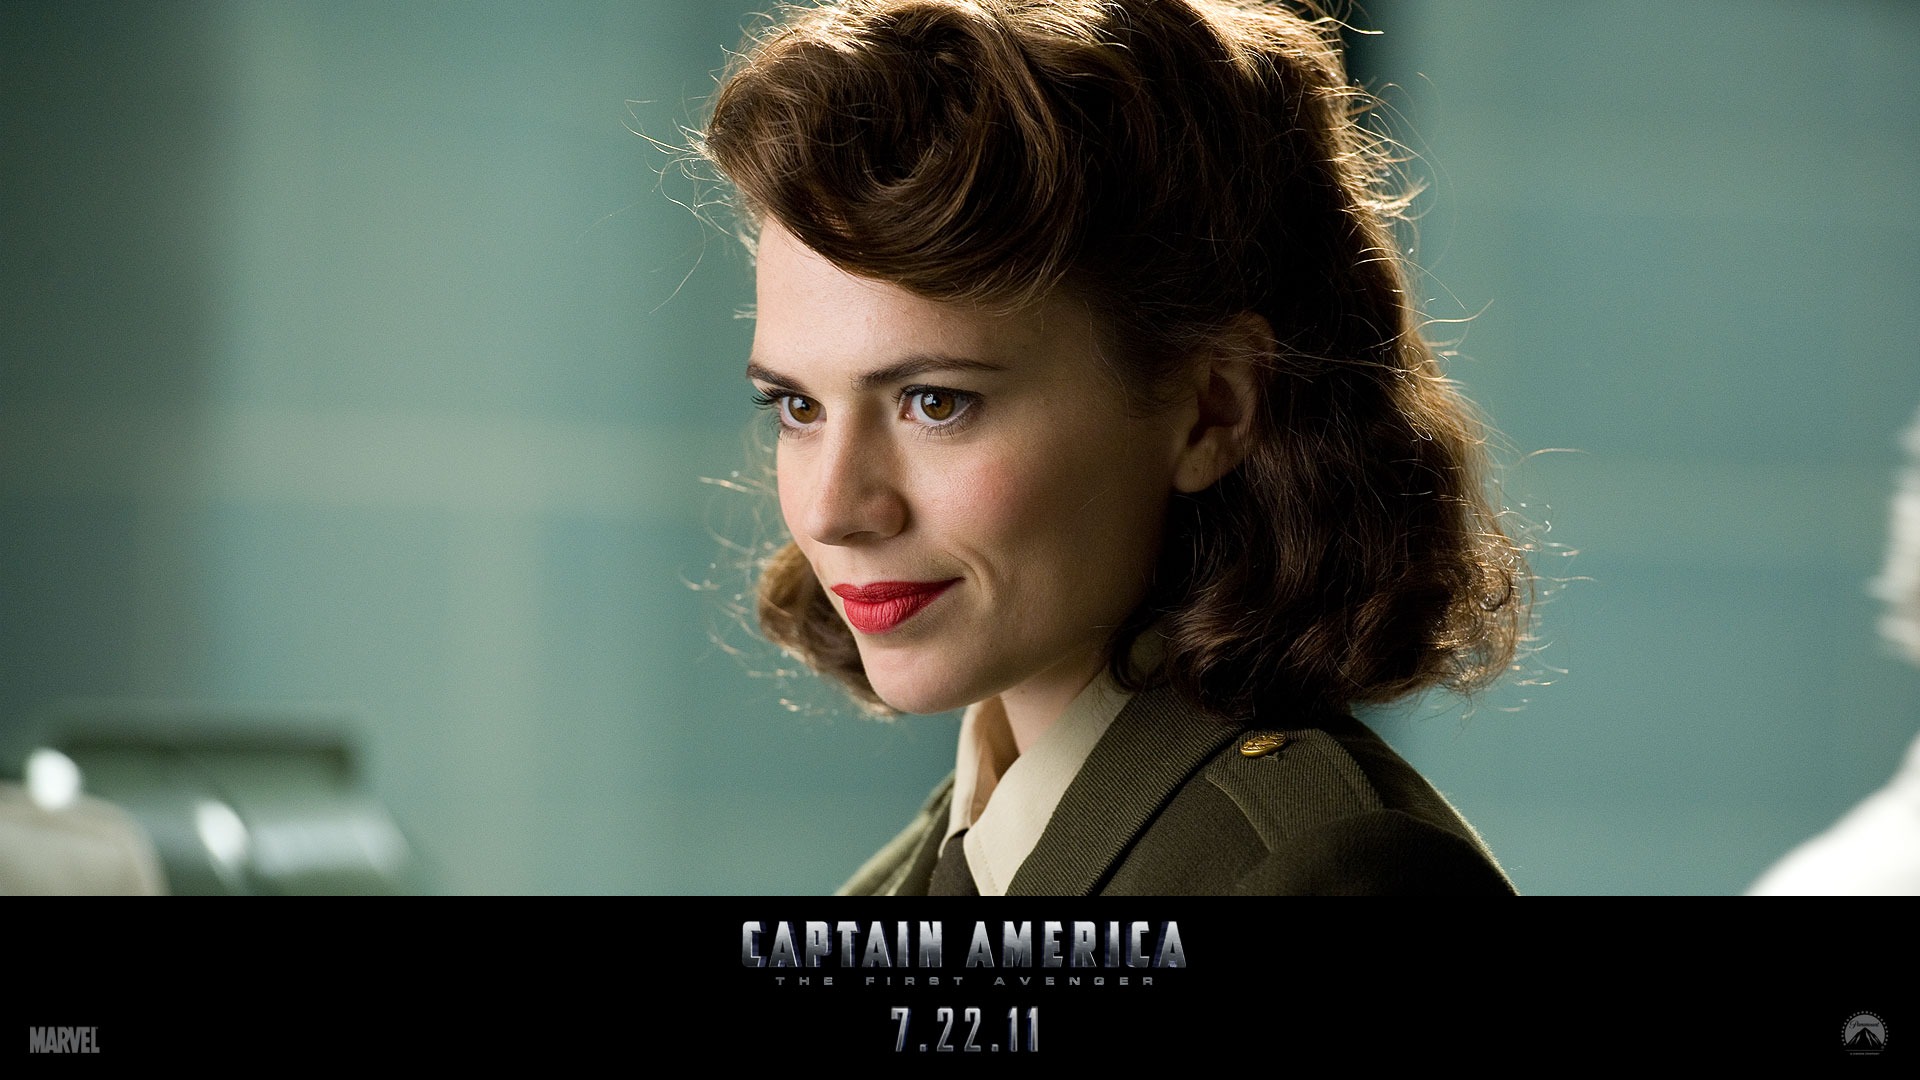 Captain America: The First Avenger HD wallpapers #11 - 1920x1080